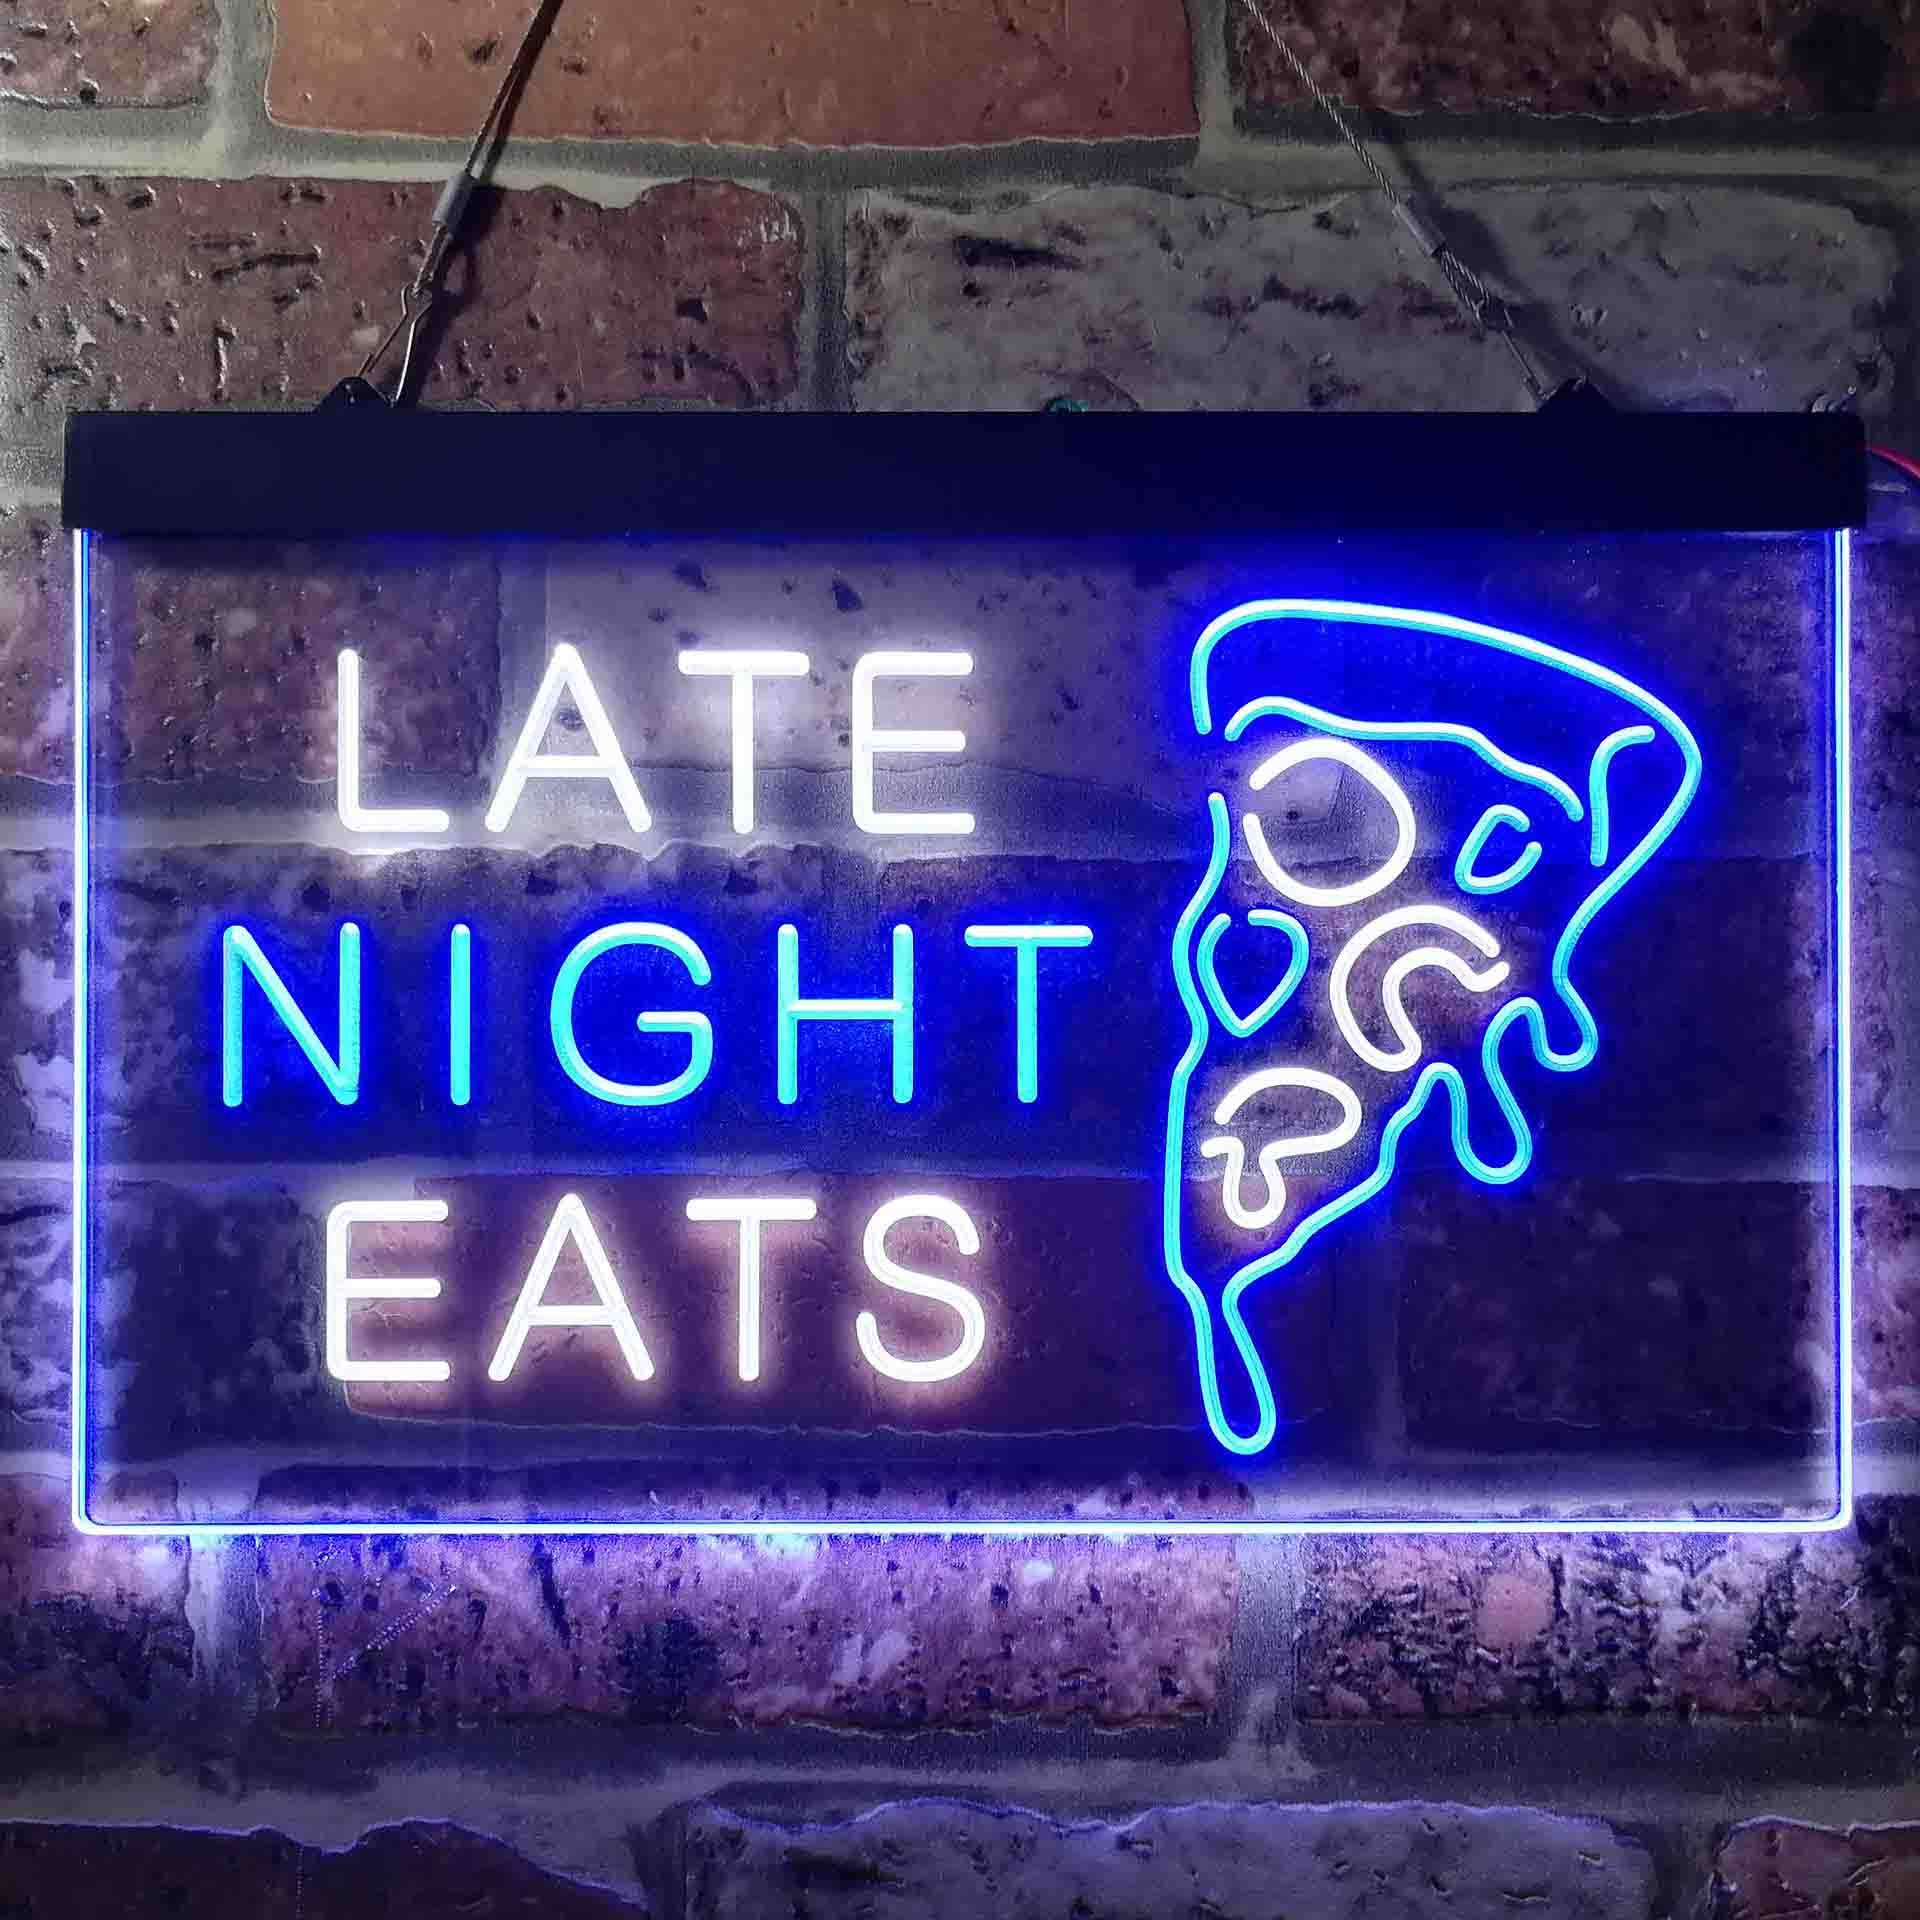 Late Night Eats Pizza CafÃ© Restaurant Display Open Dual Color | Etsy